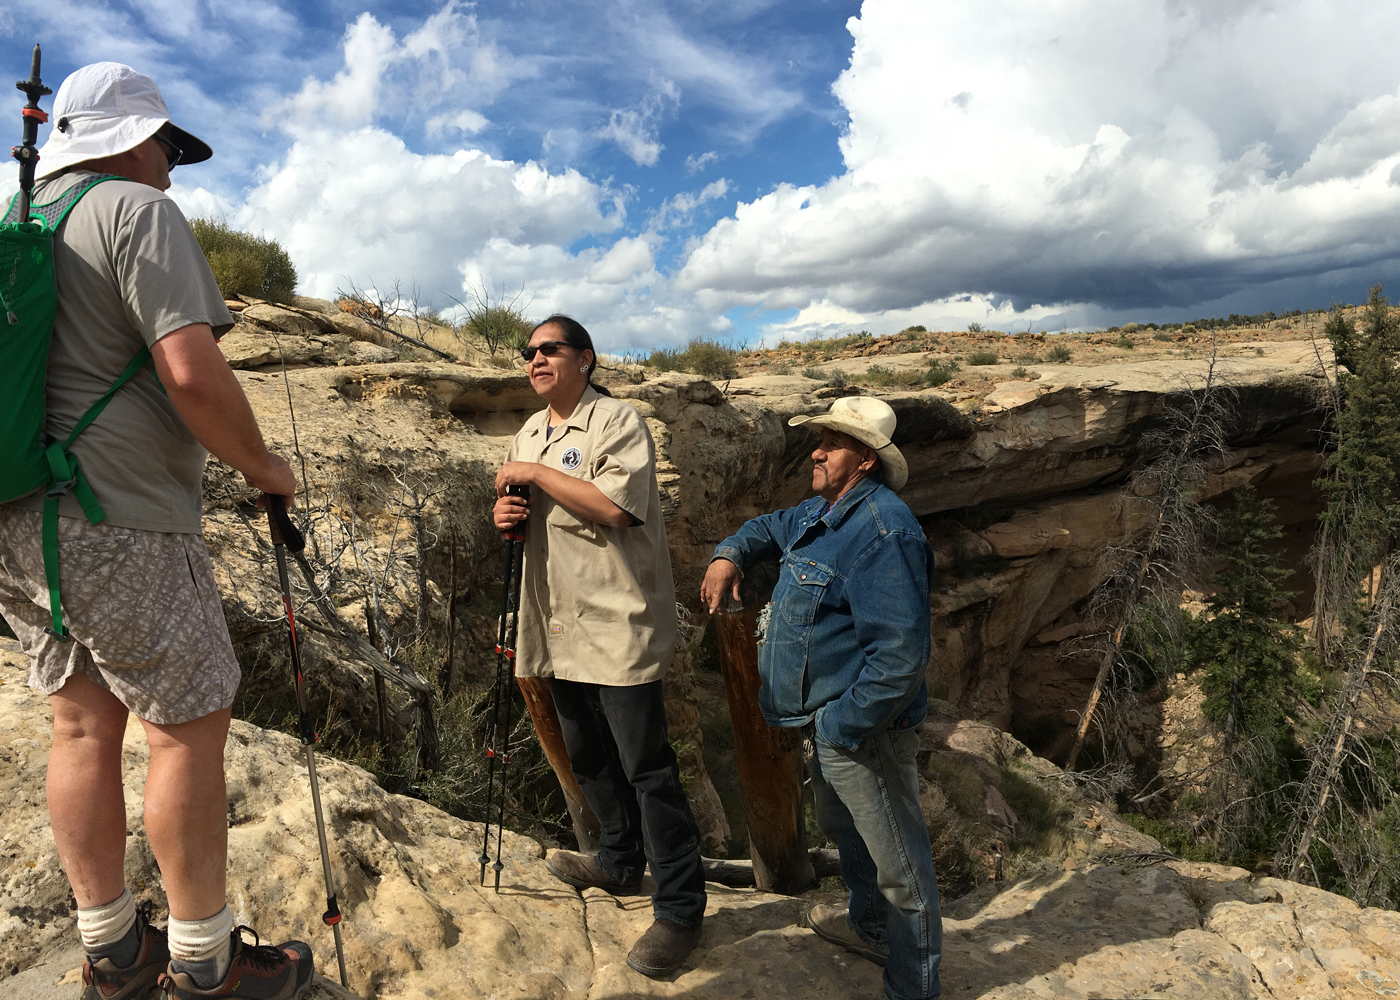 Archaeology Tour Chaco Canyon New Mexico | Sierra Club Outings